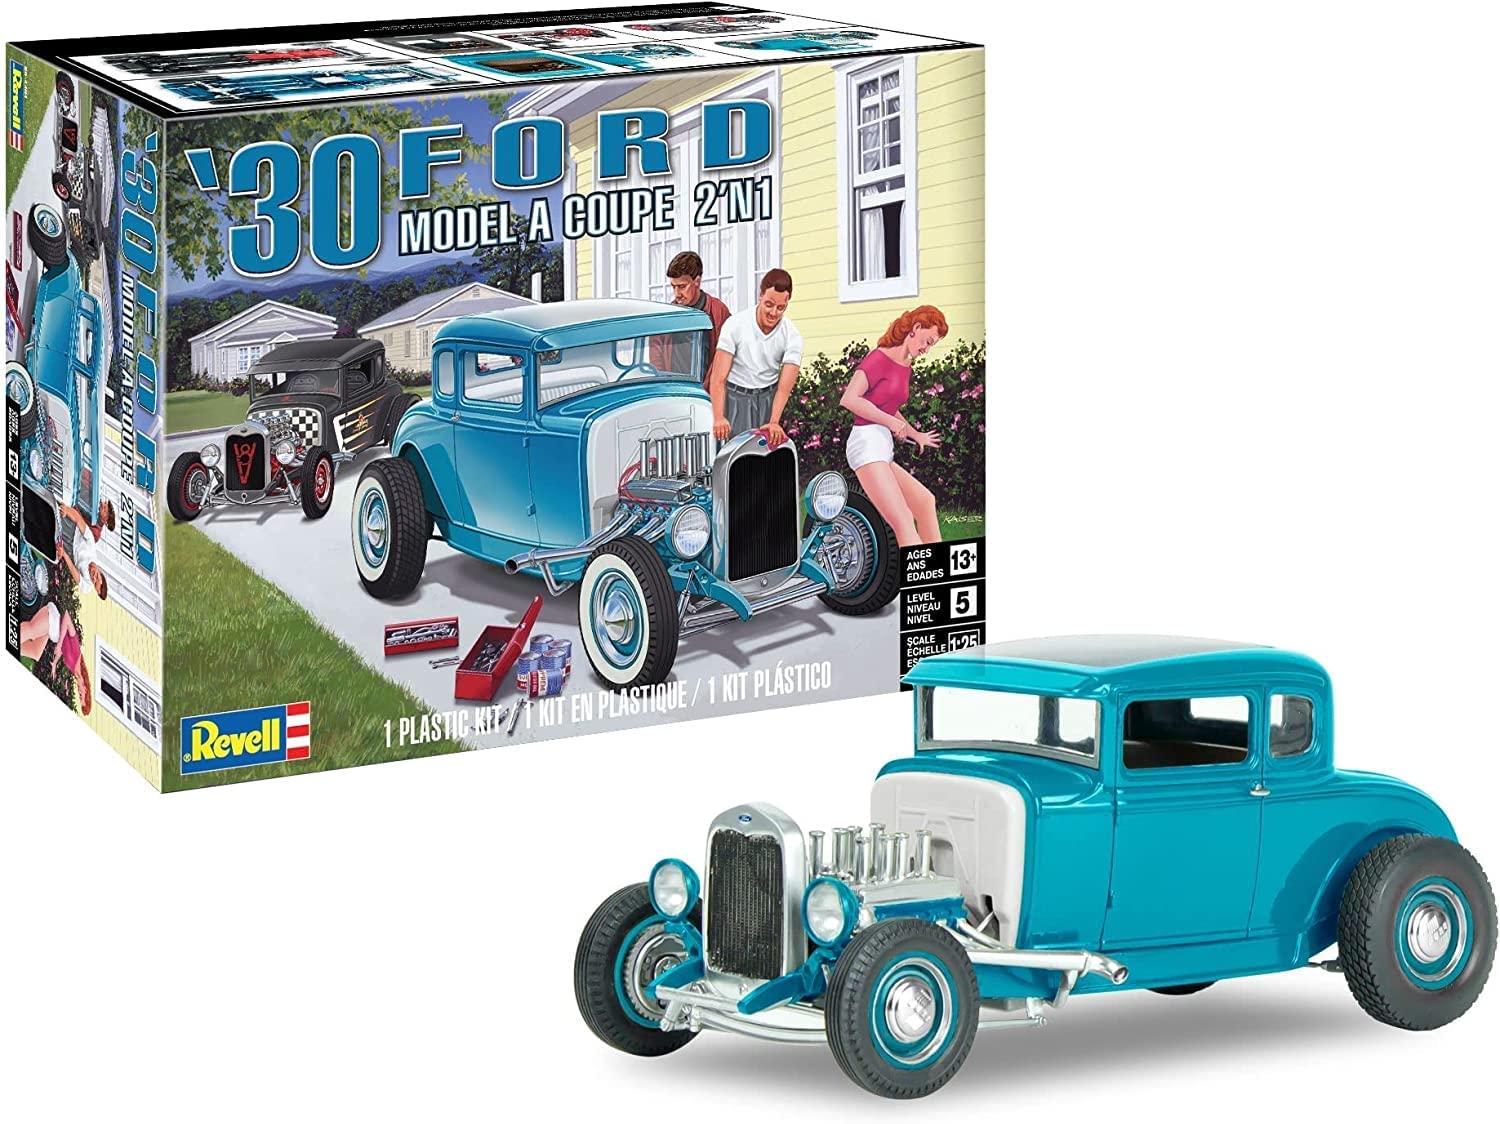 REVELL 85-4464 1/25 1930 Ford Model A Coupe 2N1